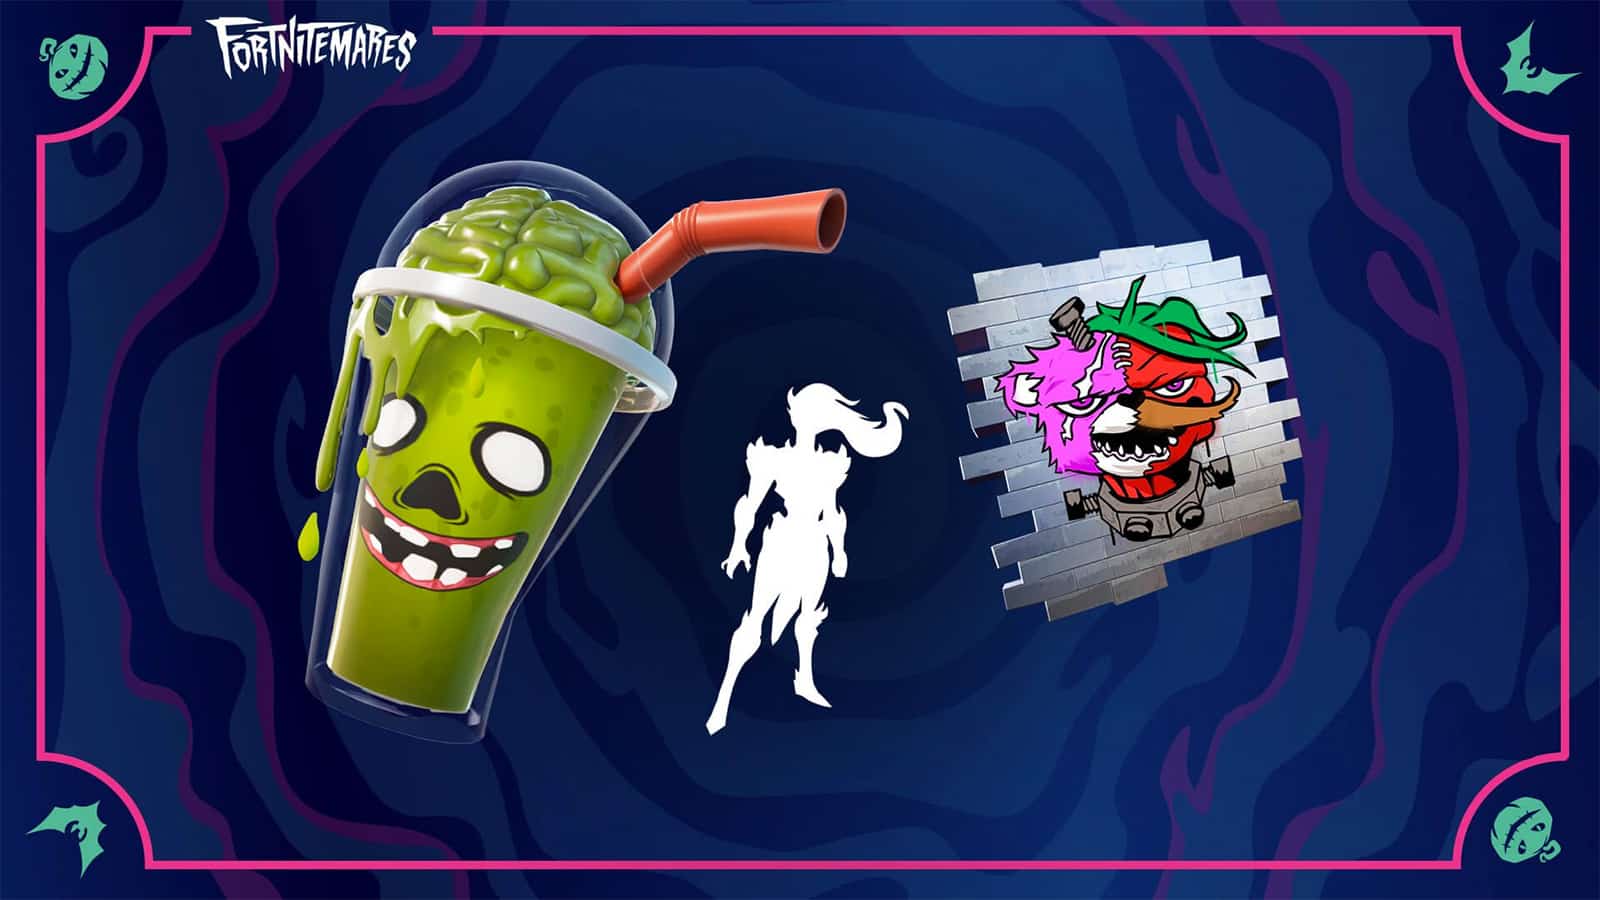 The free rewards on offer for completing Fortnitemares quests